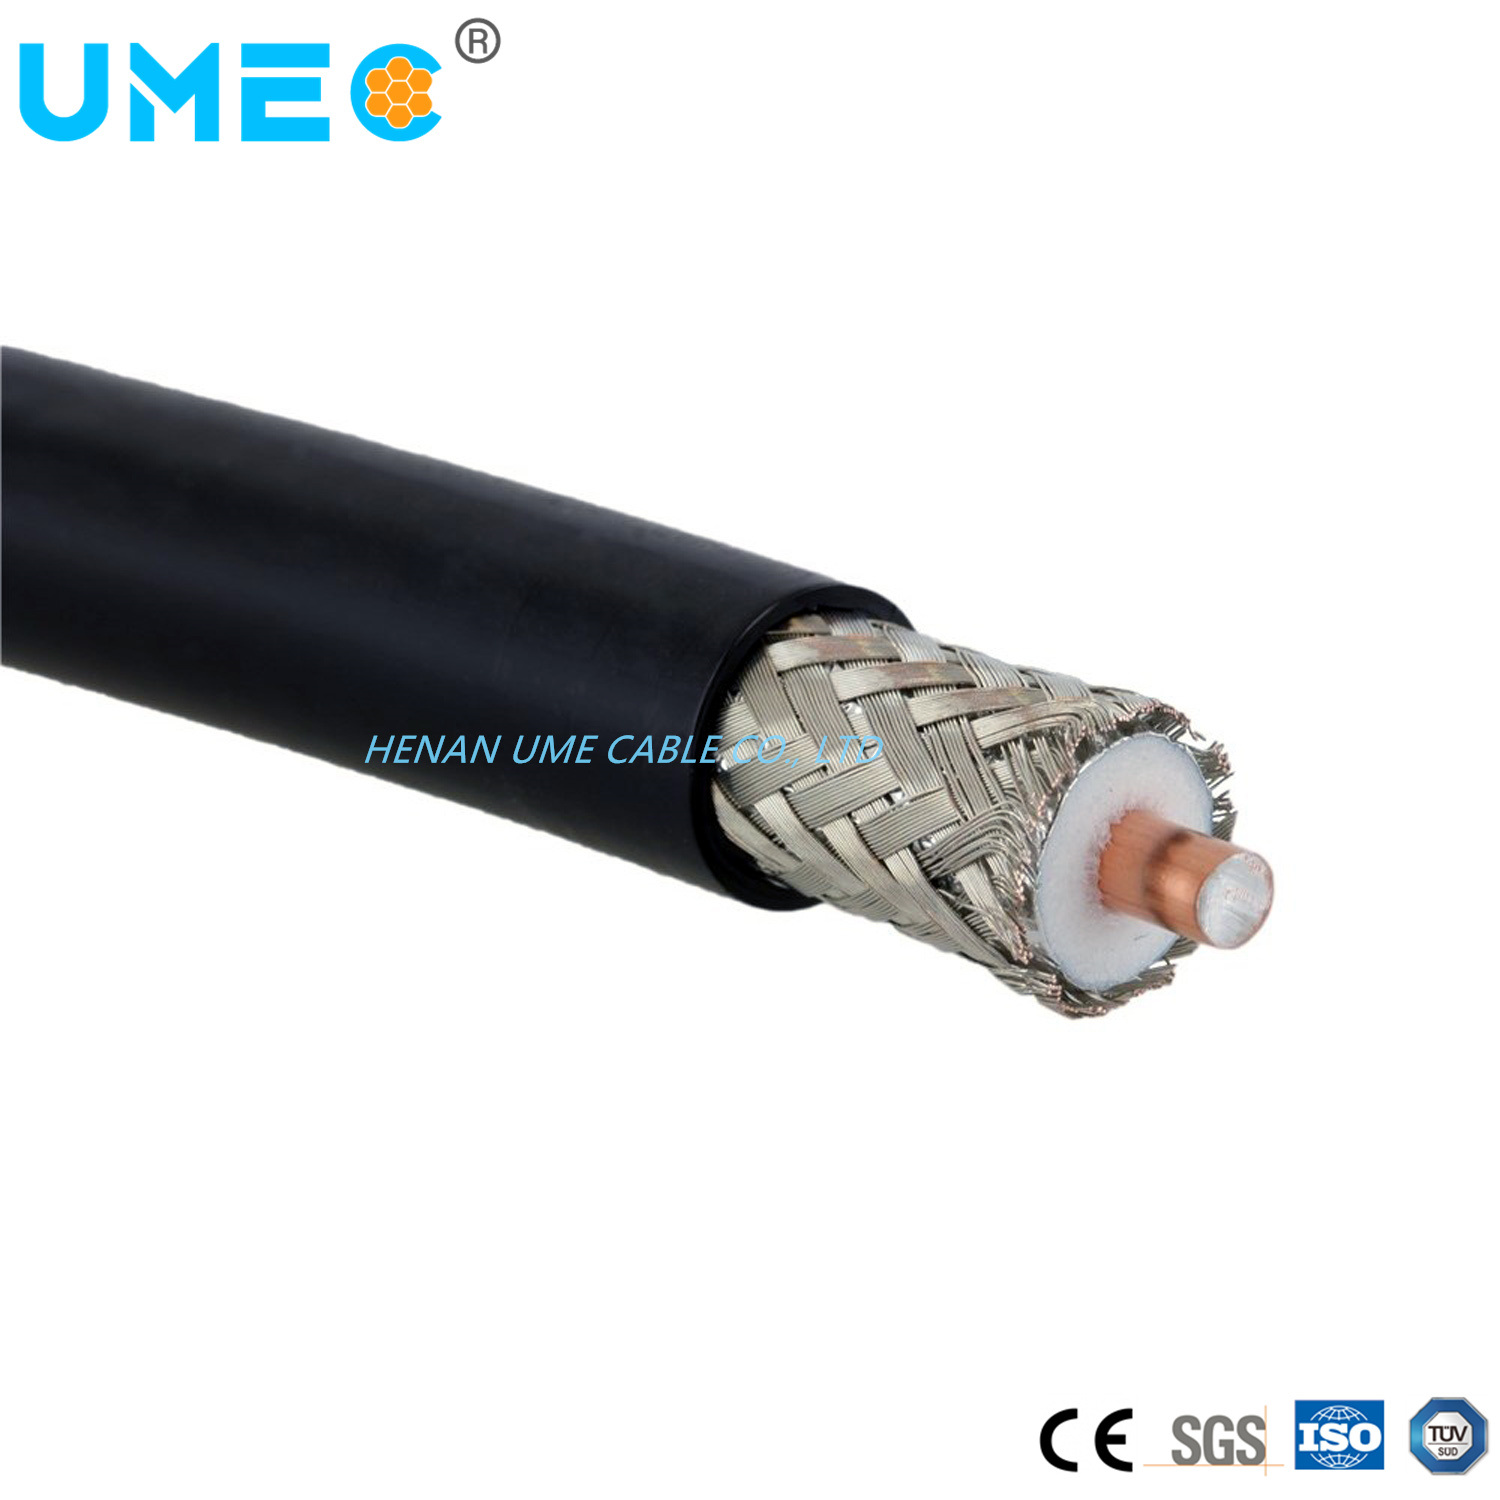 High-Performance CCA Aluminum Conductor RF Coaxial Cable LMR400/Rg213/Rg8 Type Low Loss Coaxial Cable